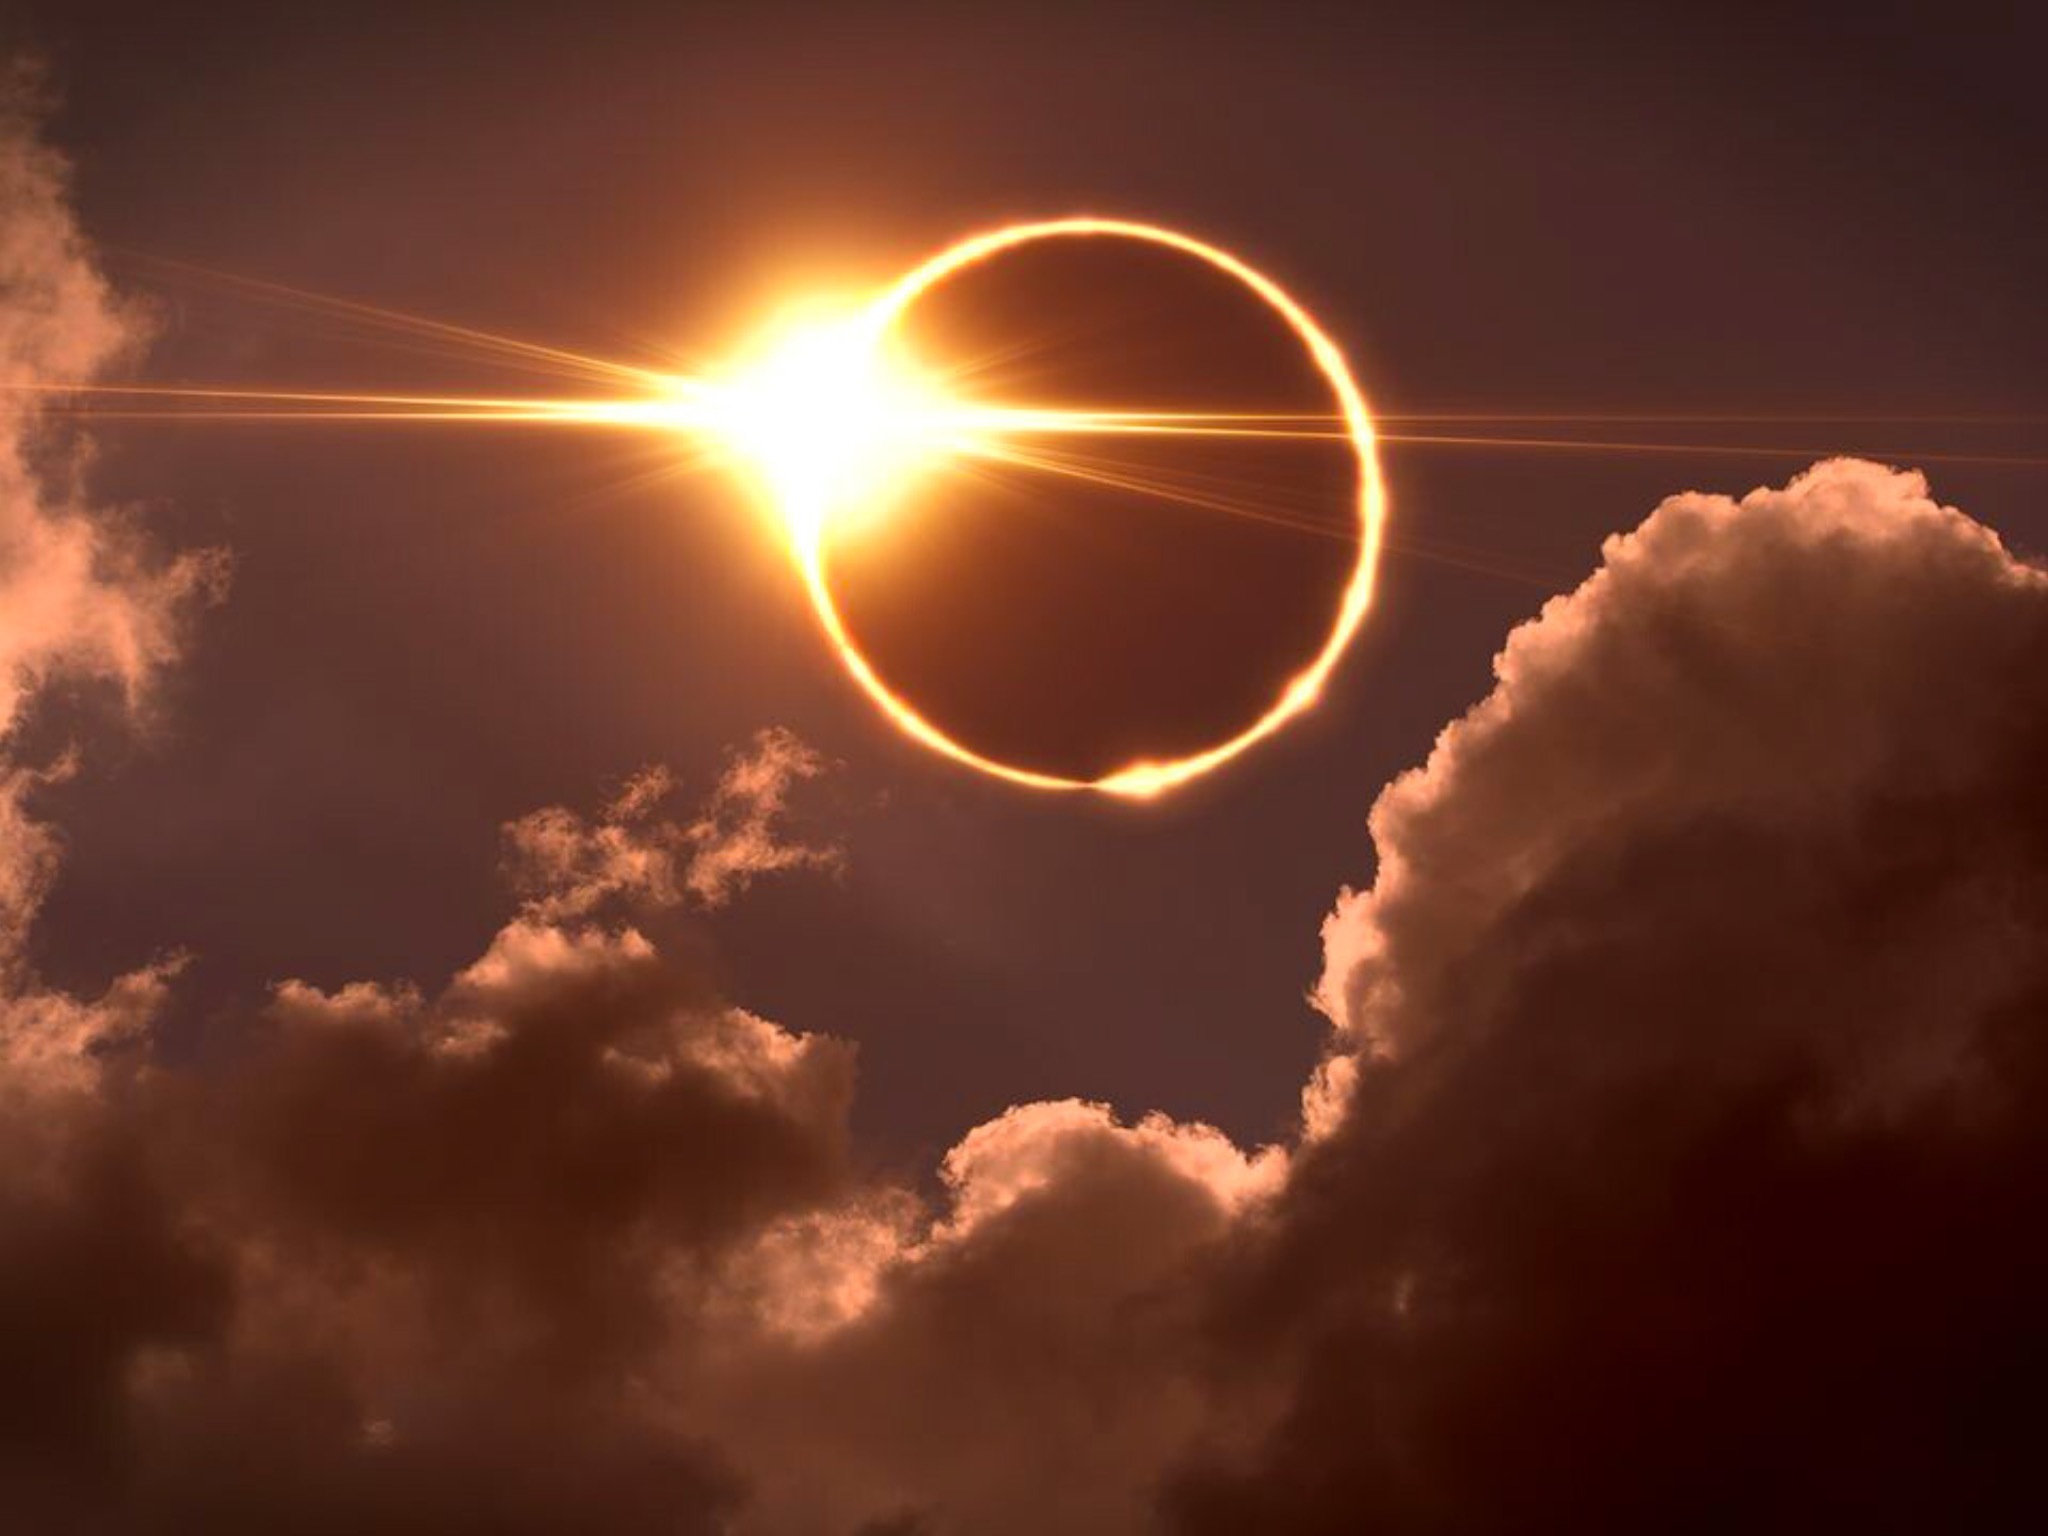 In Pictures: 'Ring of fire' solar eclipse wows millions | Gallery | Al  Jazeera